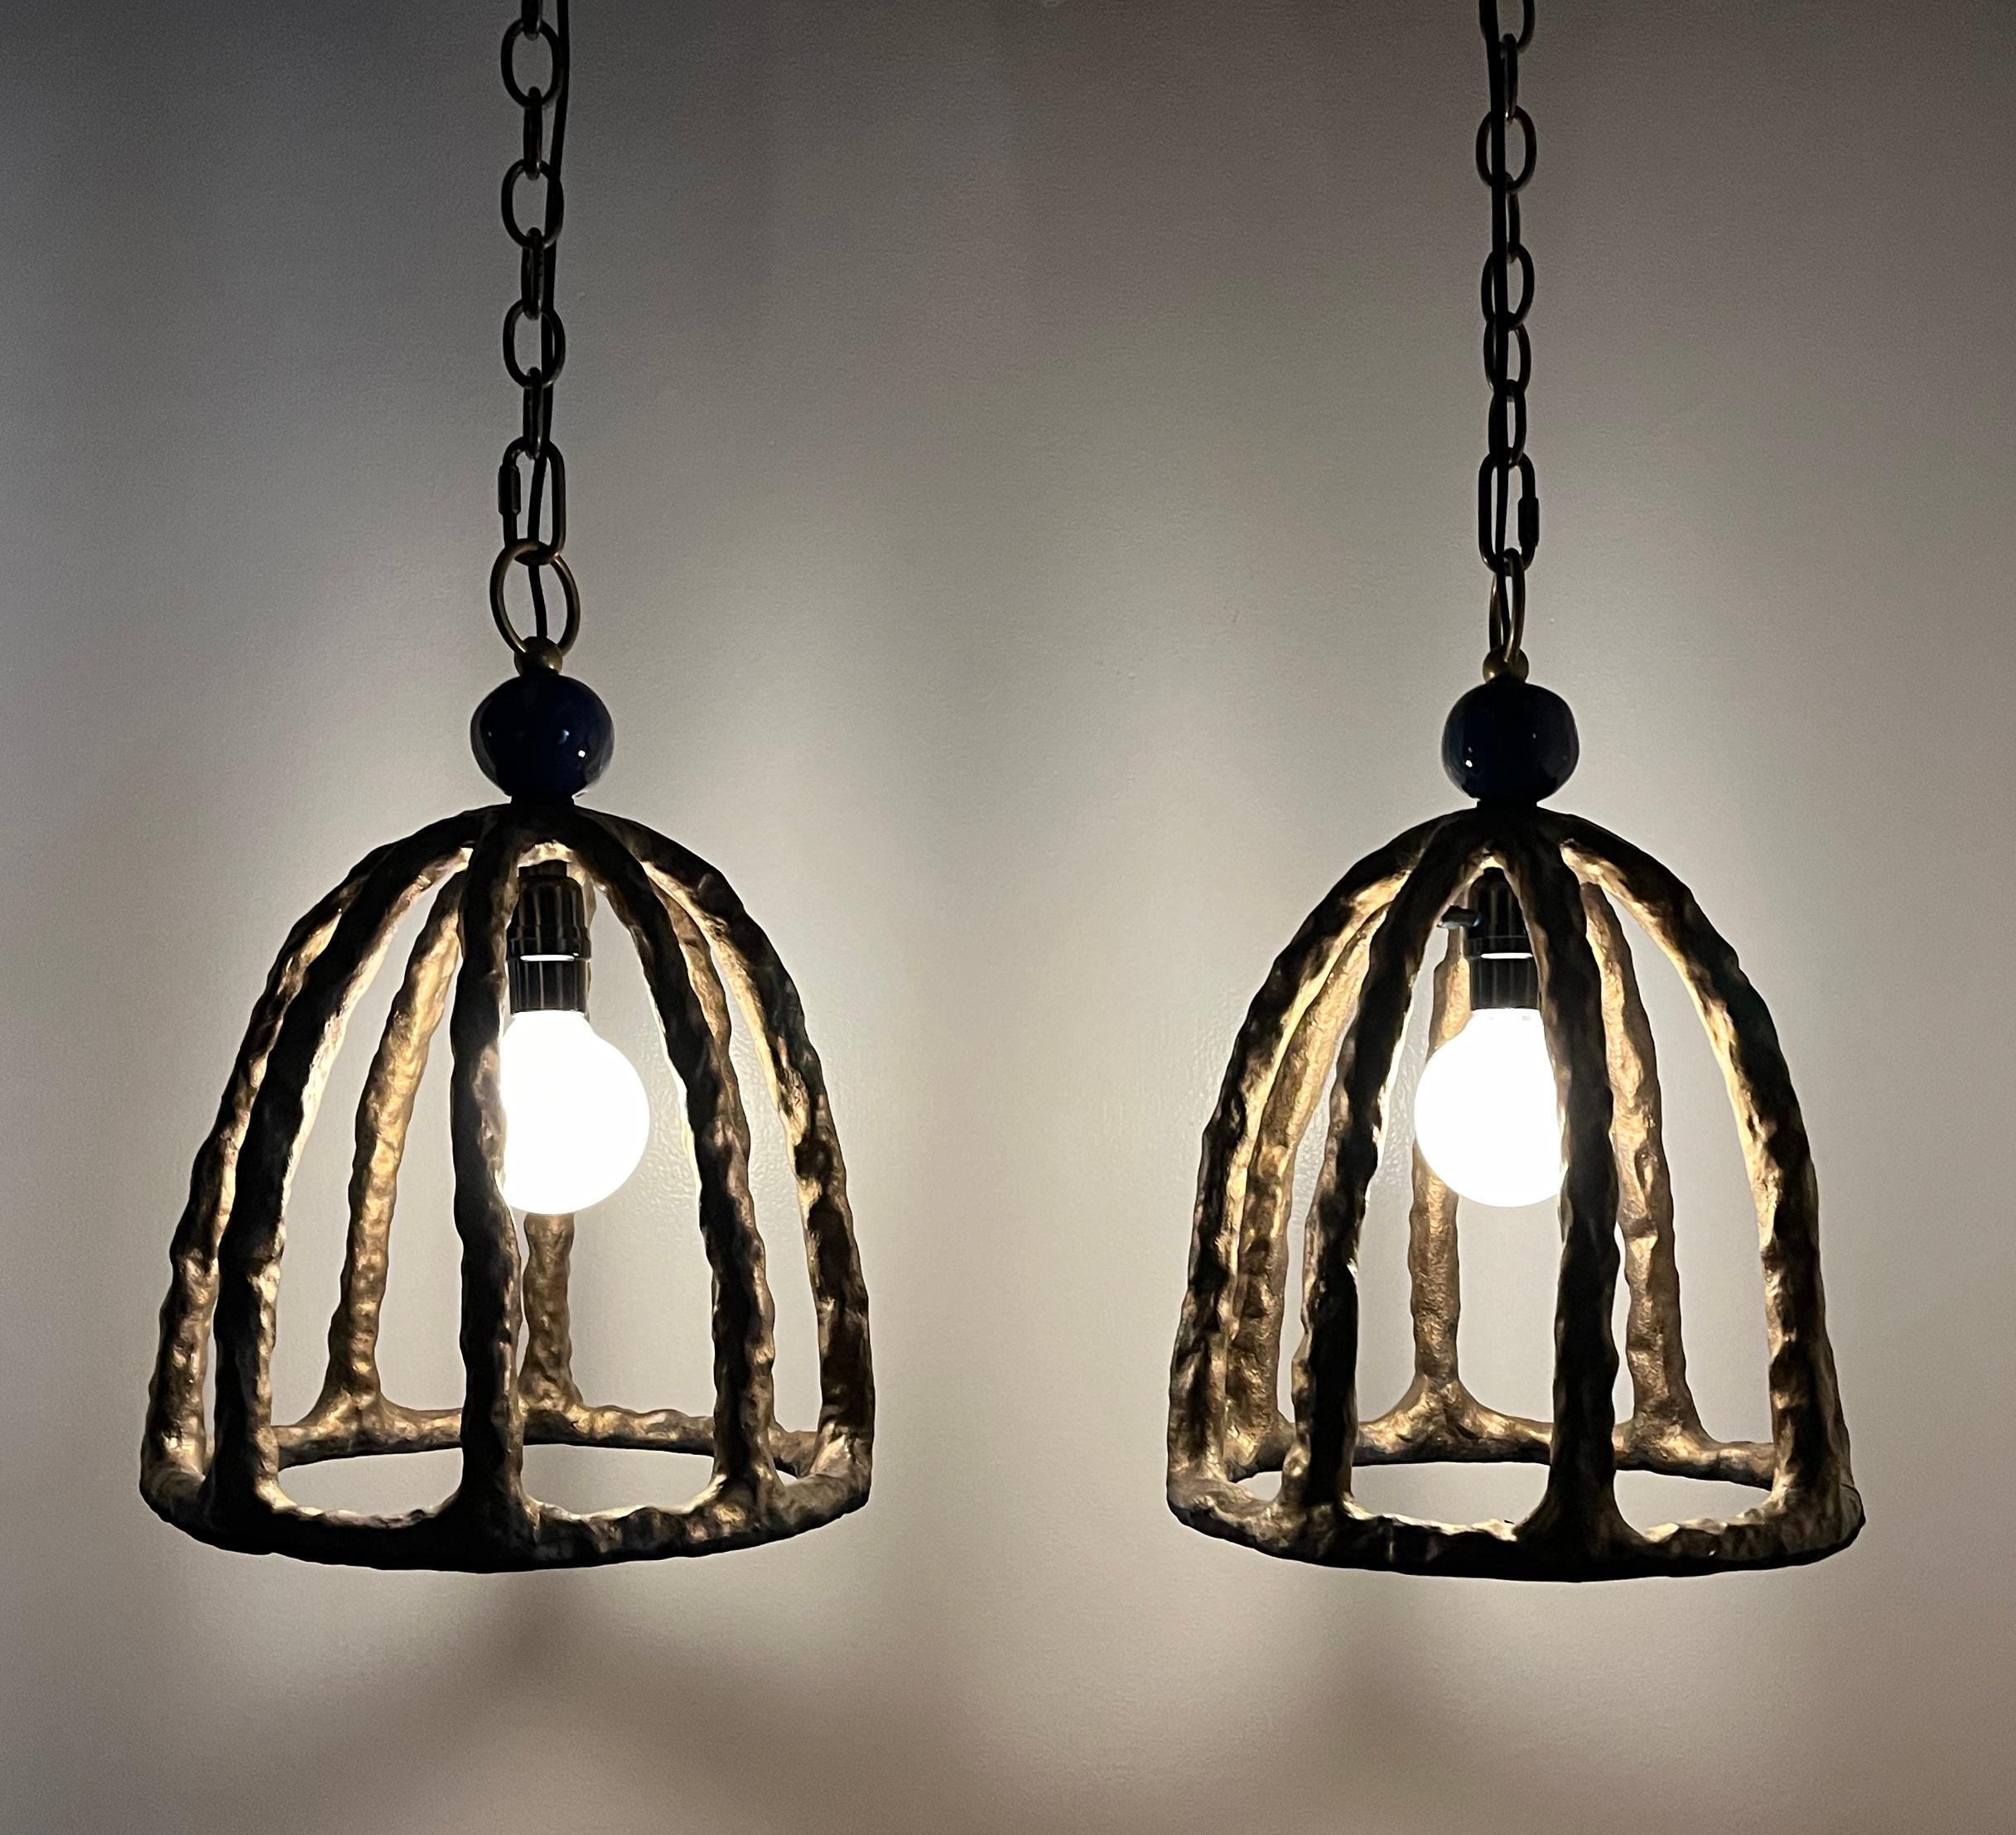 Glazed Birdcage Stoneware Pendant Lamp Pair by Olivia Barry / By Hand Eclectic Mix For Sale